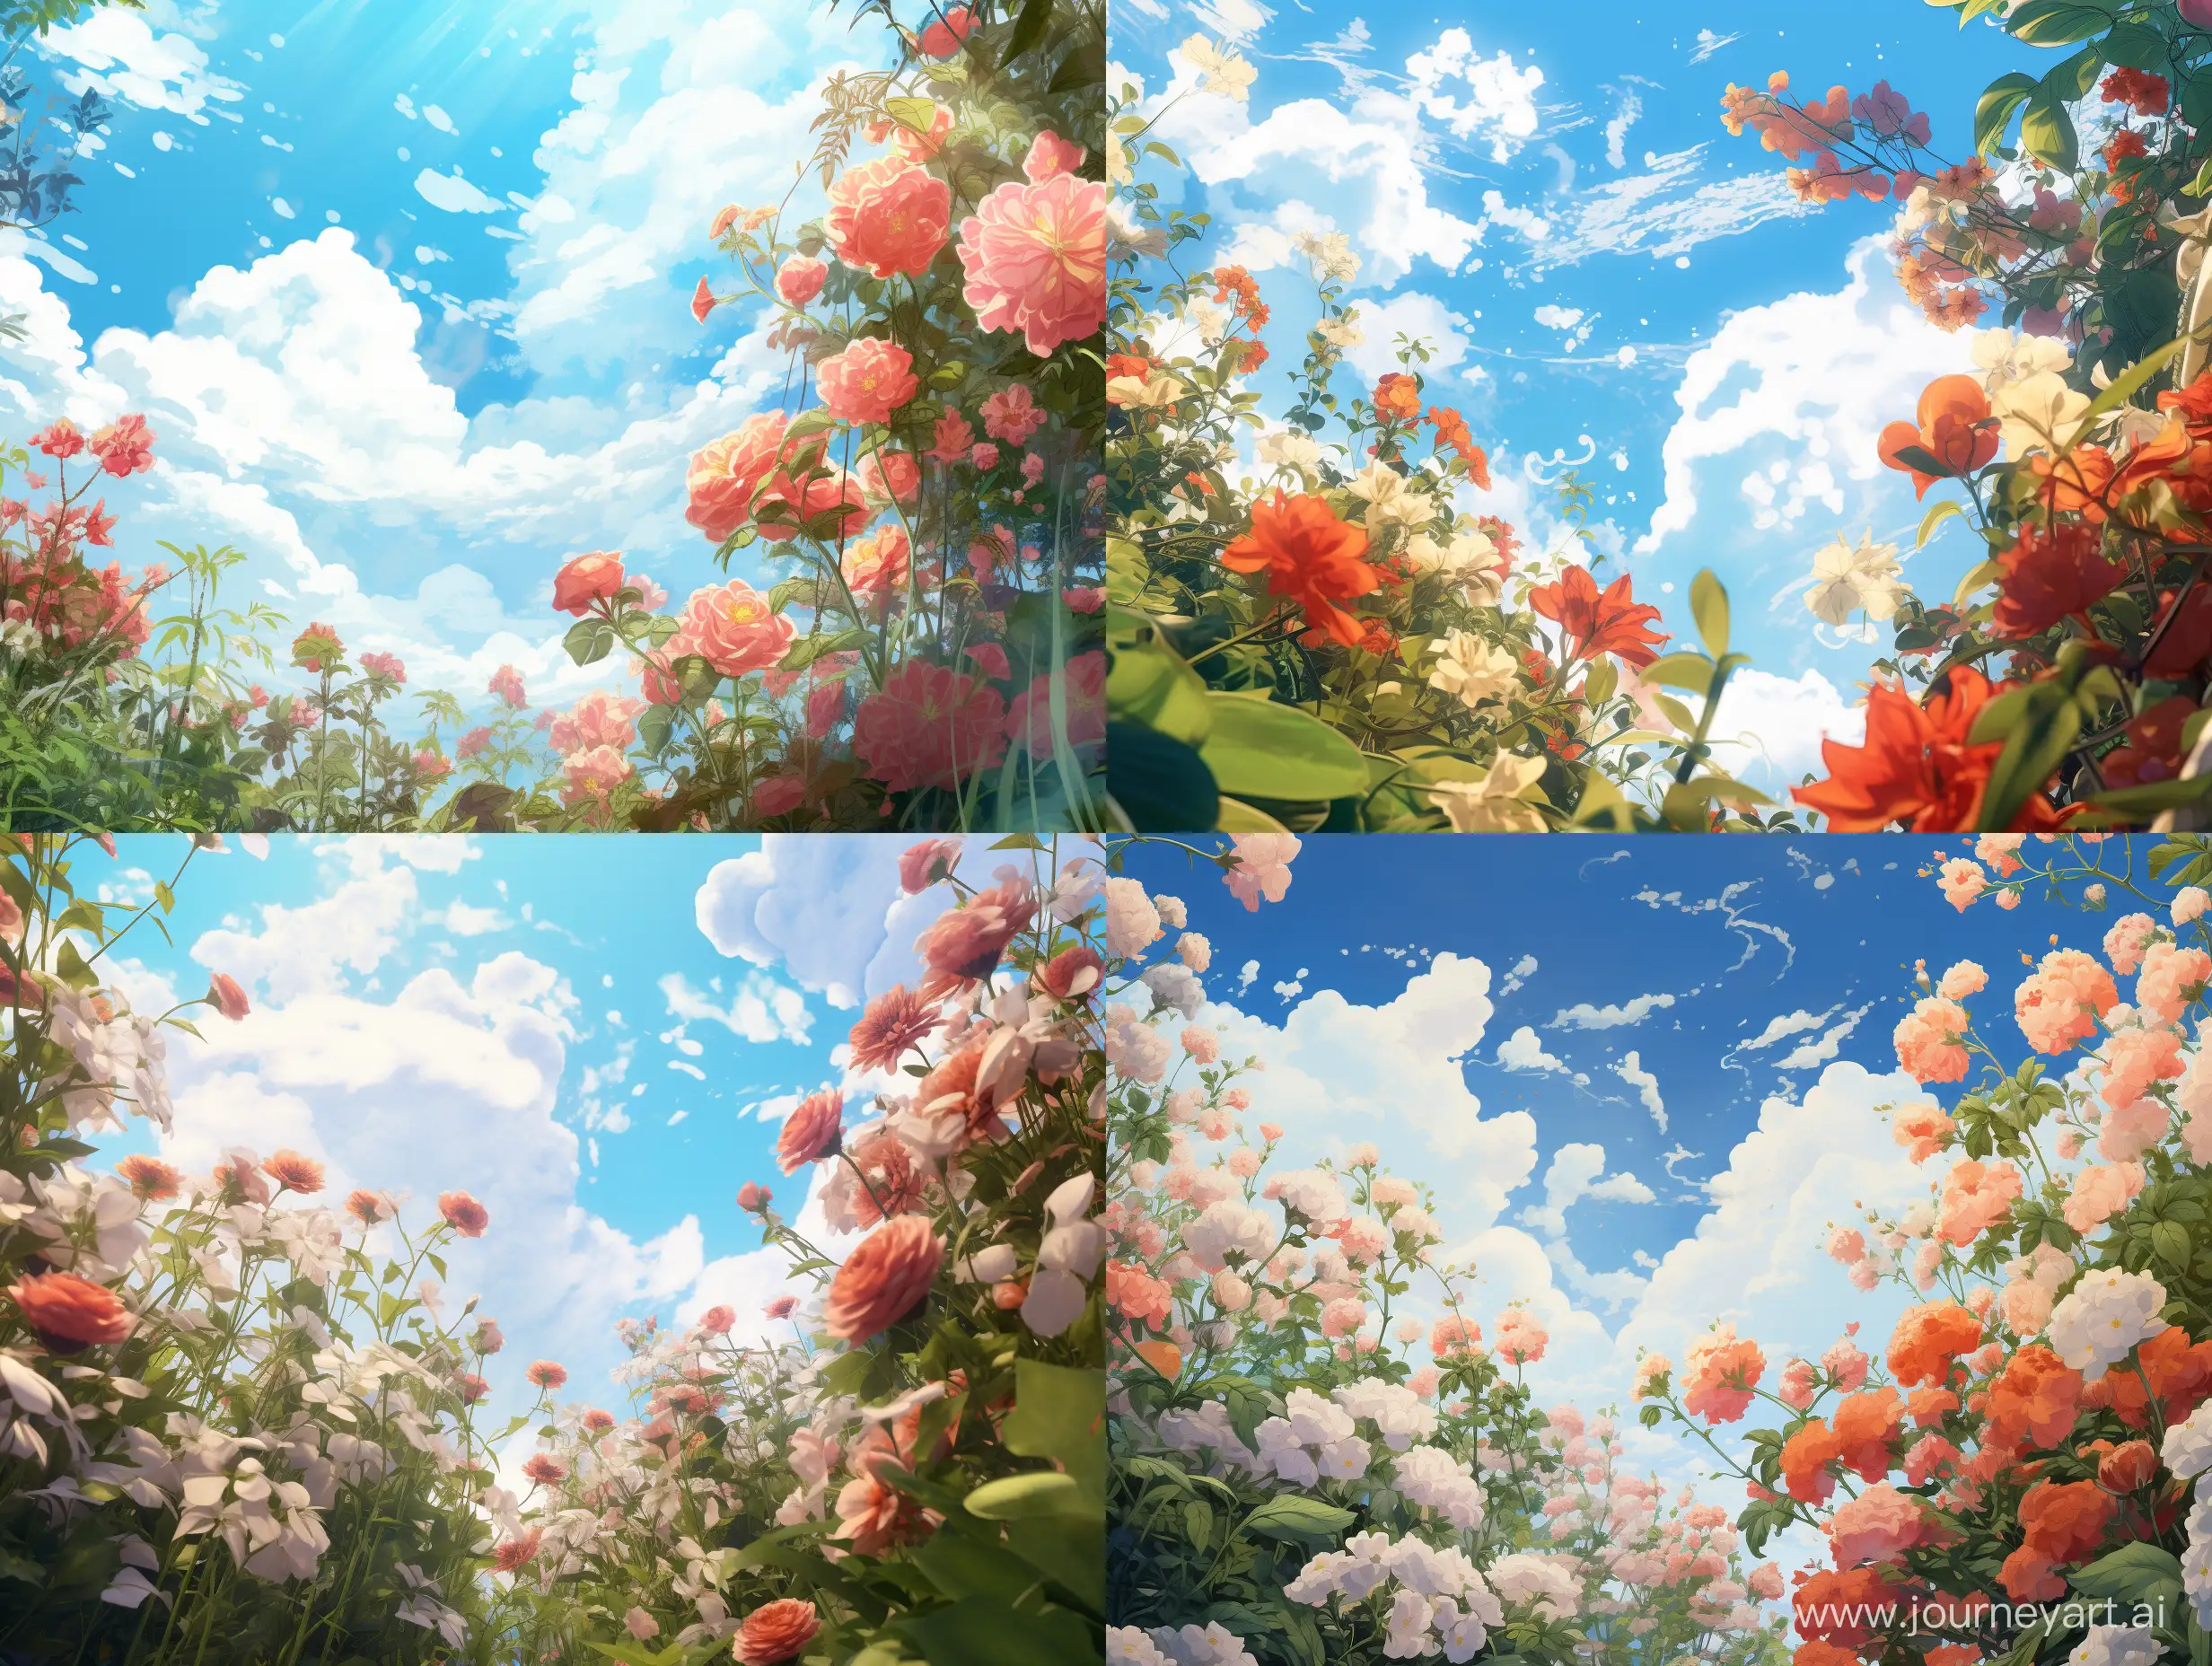 Blooming-Flower-Bushes-Beneath-a-Clear-Sky